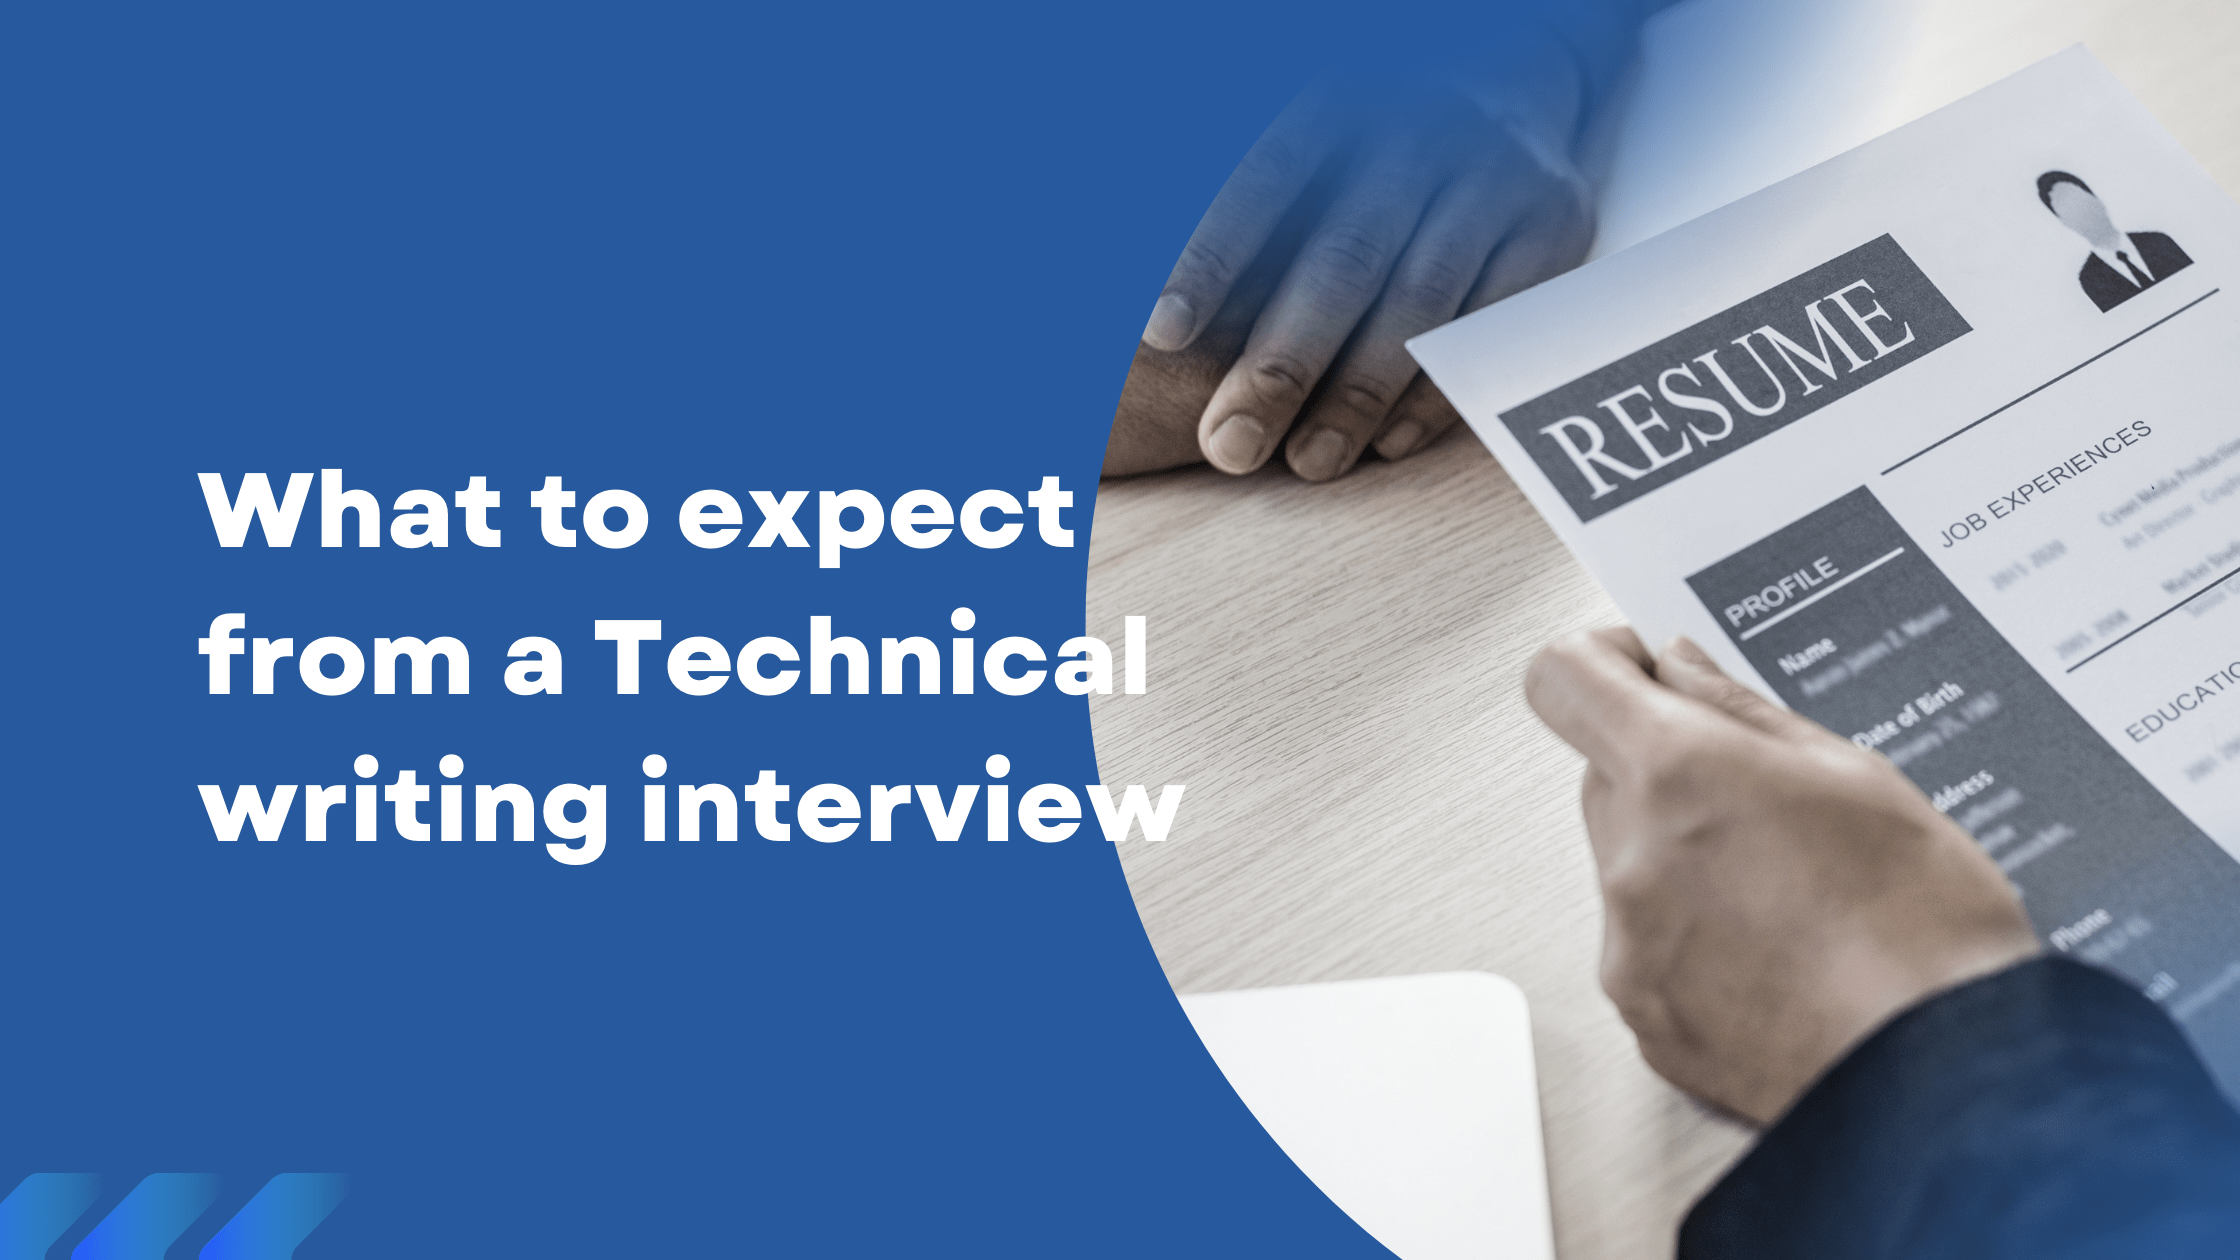 Technical writer interview: what to expect from personal experience